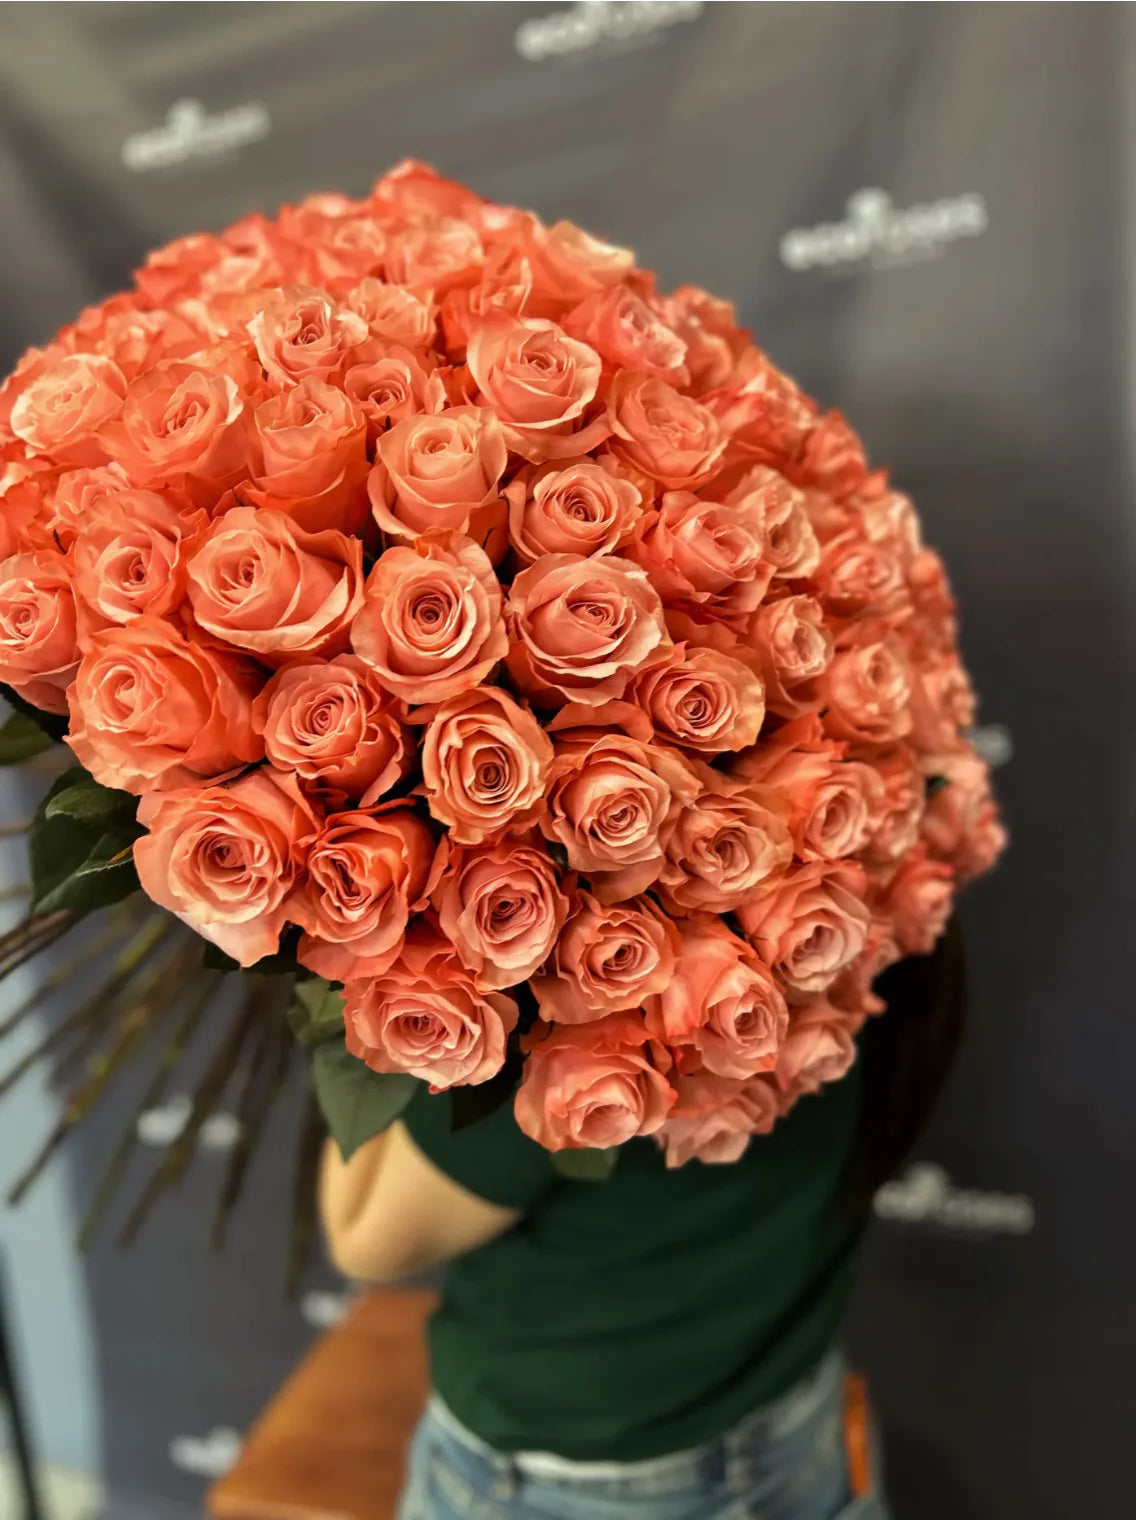 Flower Shops In Glendale - Man carrying a large bouquet of Apricot Delight roses, showcasing the vibrant and lush hues of the blooms-Flower Shops In Glendale California